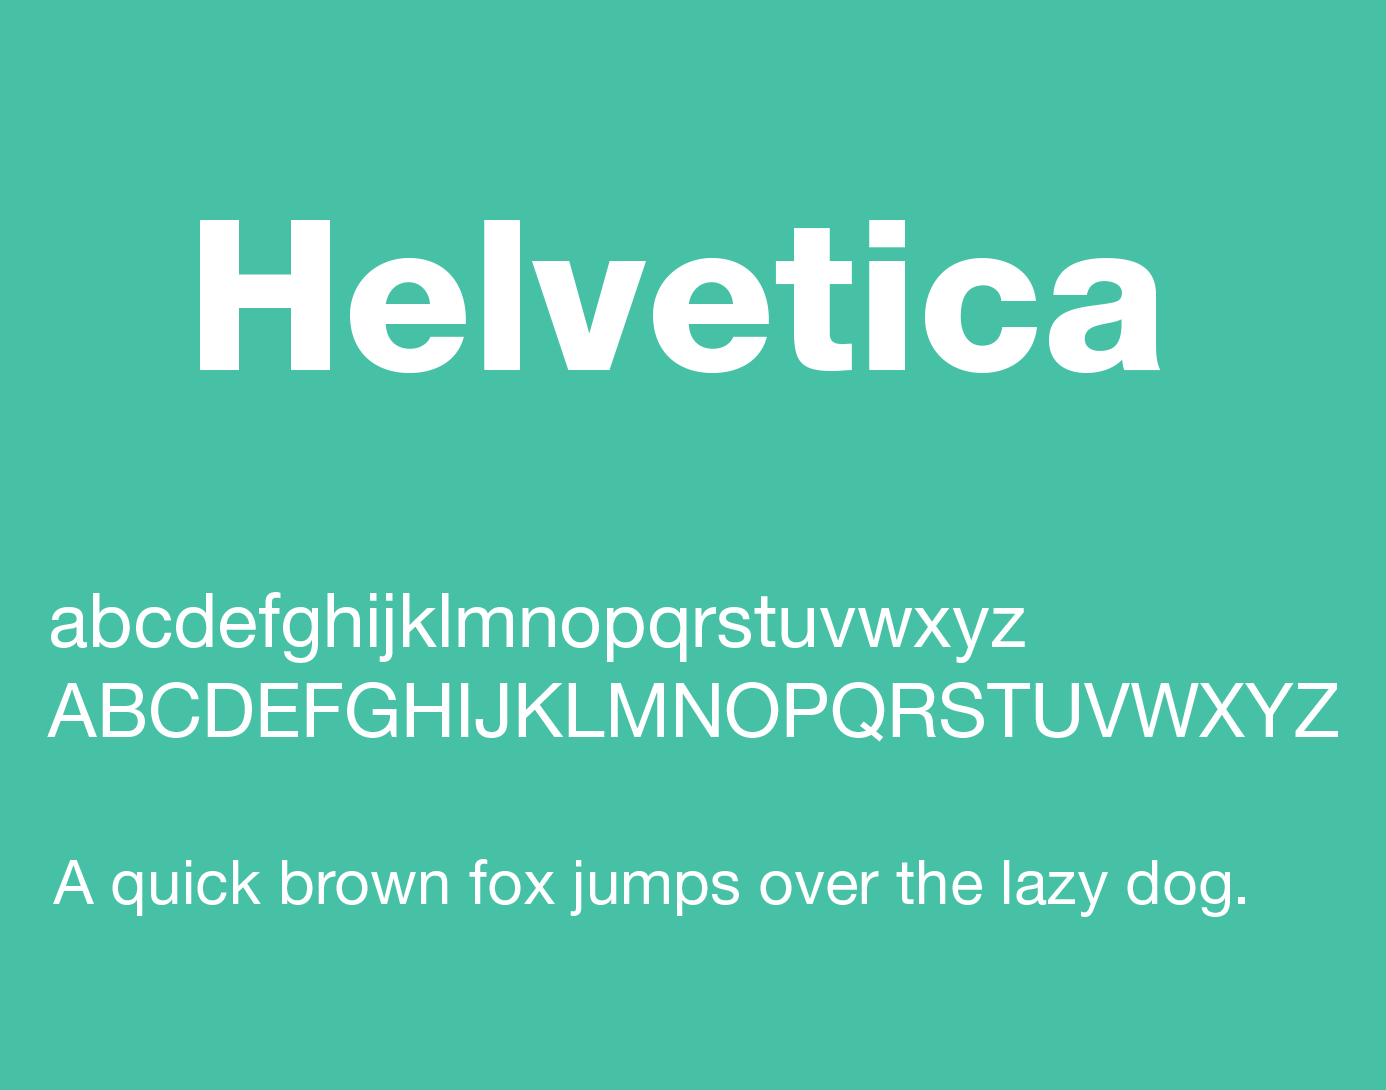 Helvetica Neue Font Family Free Download For Mac